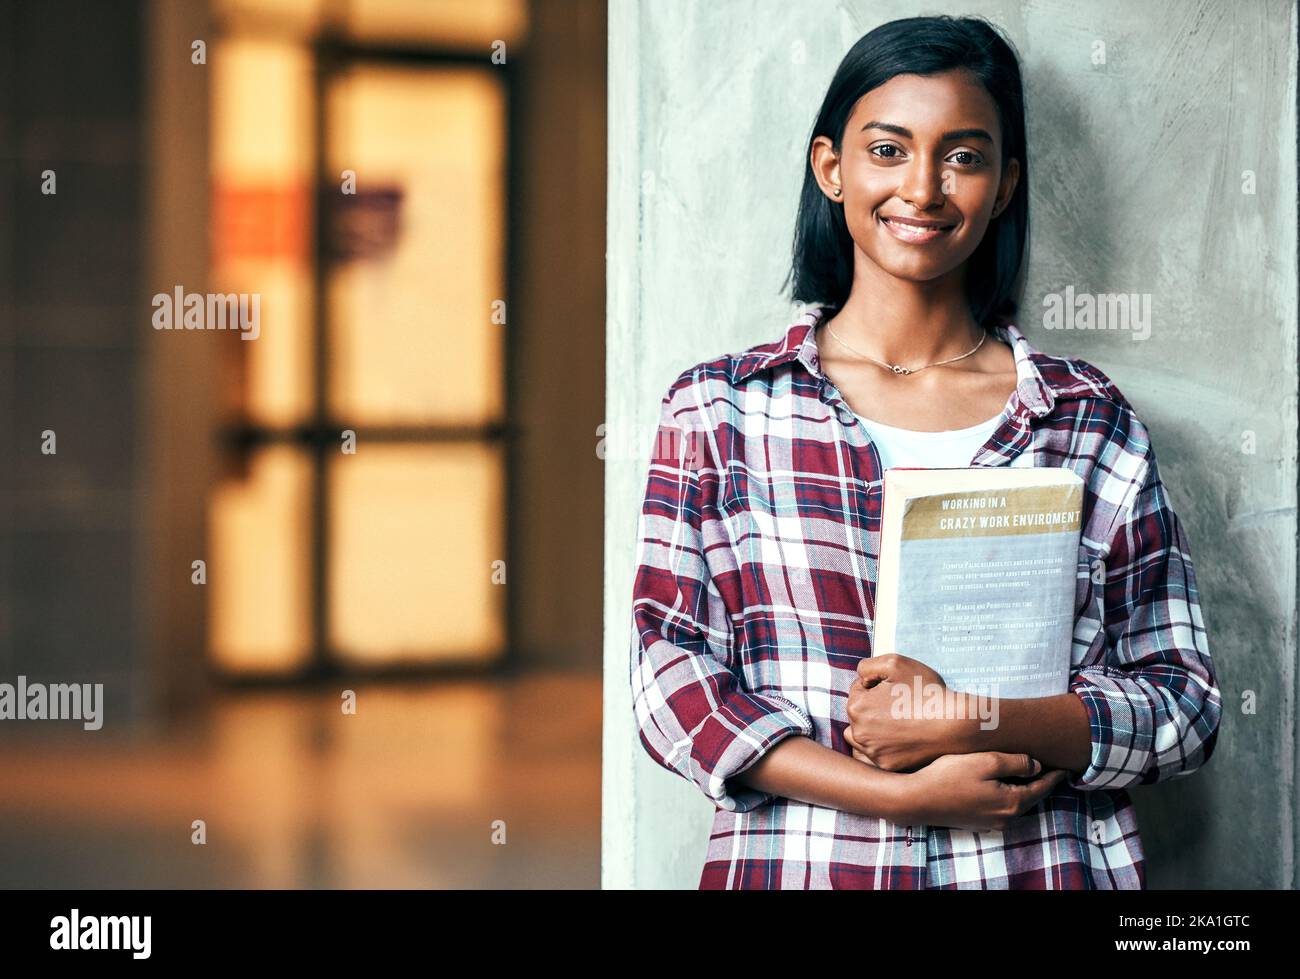 Strive for success in college, so study hard. Portrait of a young female student outside on campus. Stock Photo